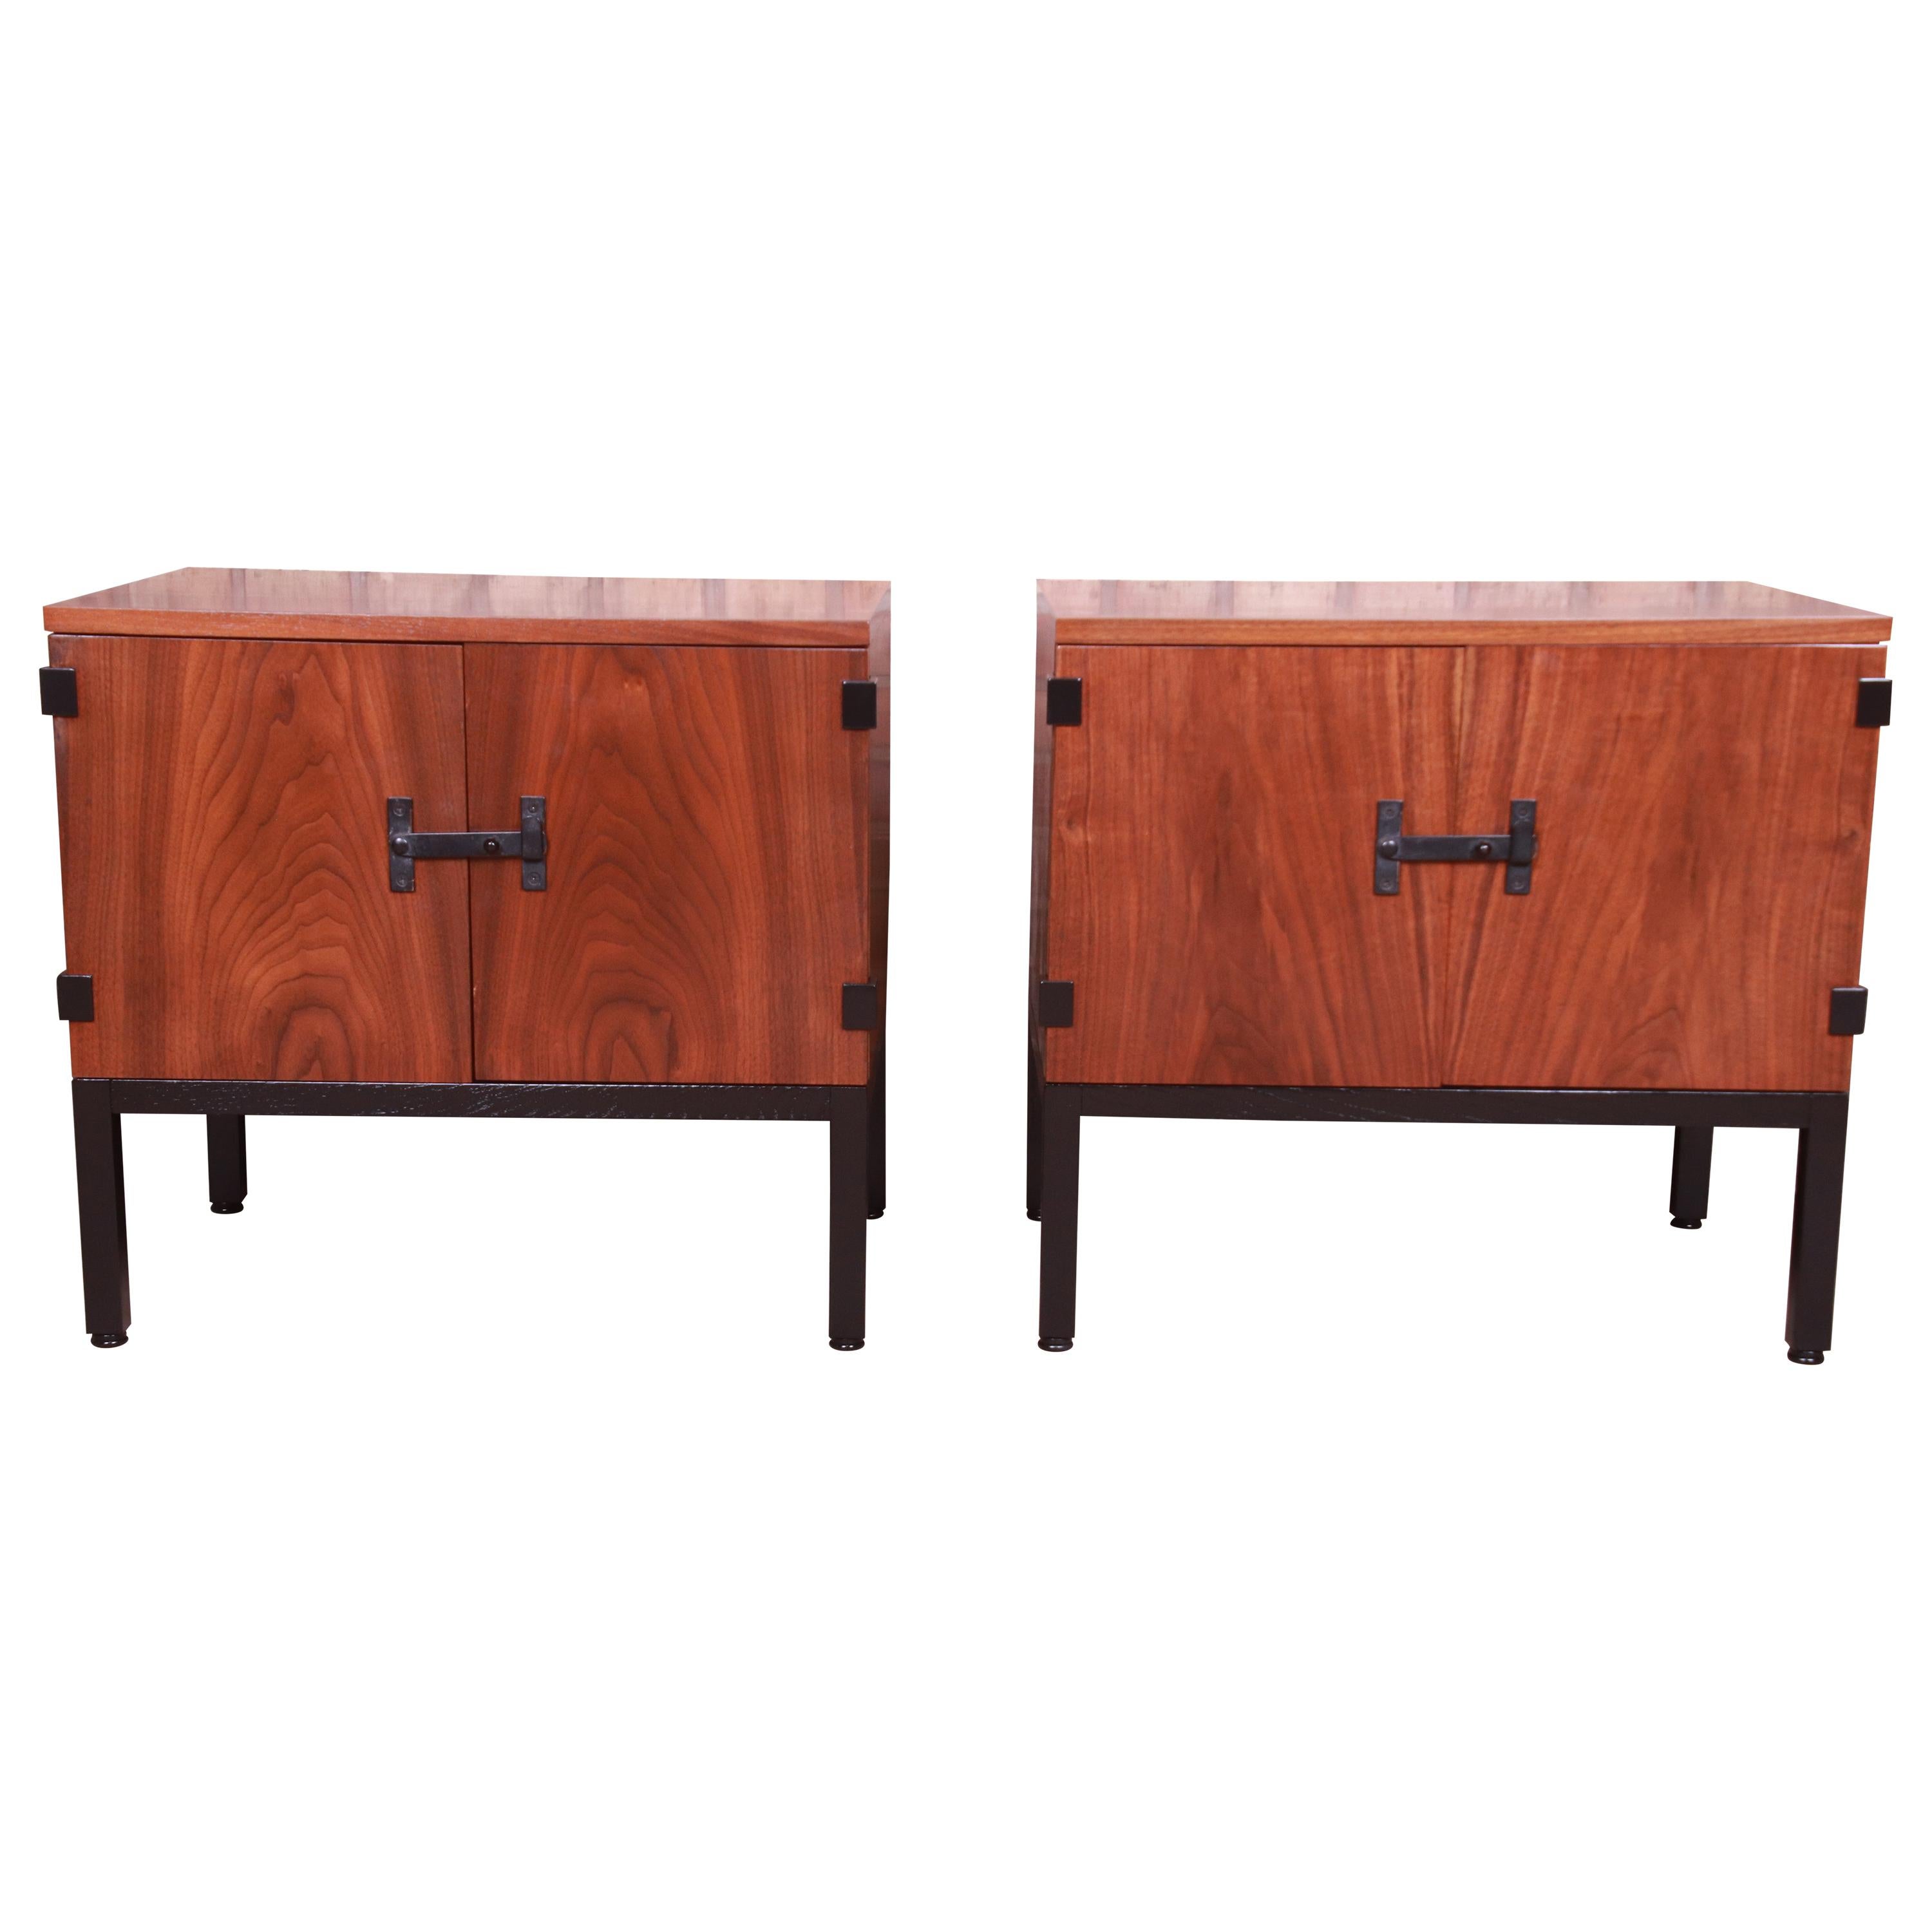 Milo Baughman for Directional Walnut and Ebonized Nightstands, Newly Refinished